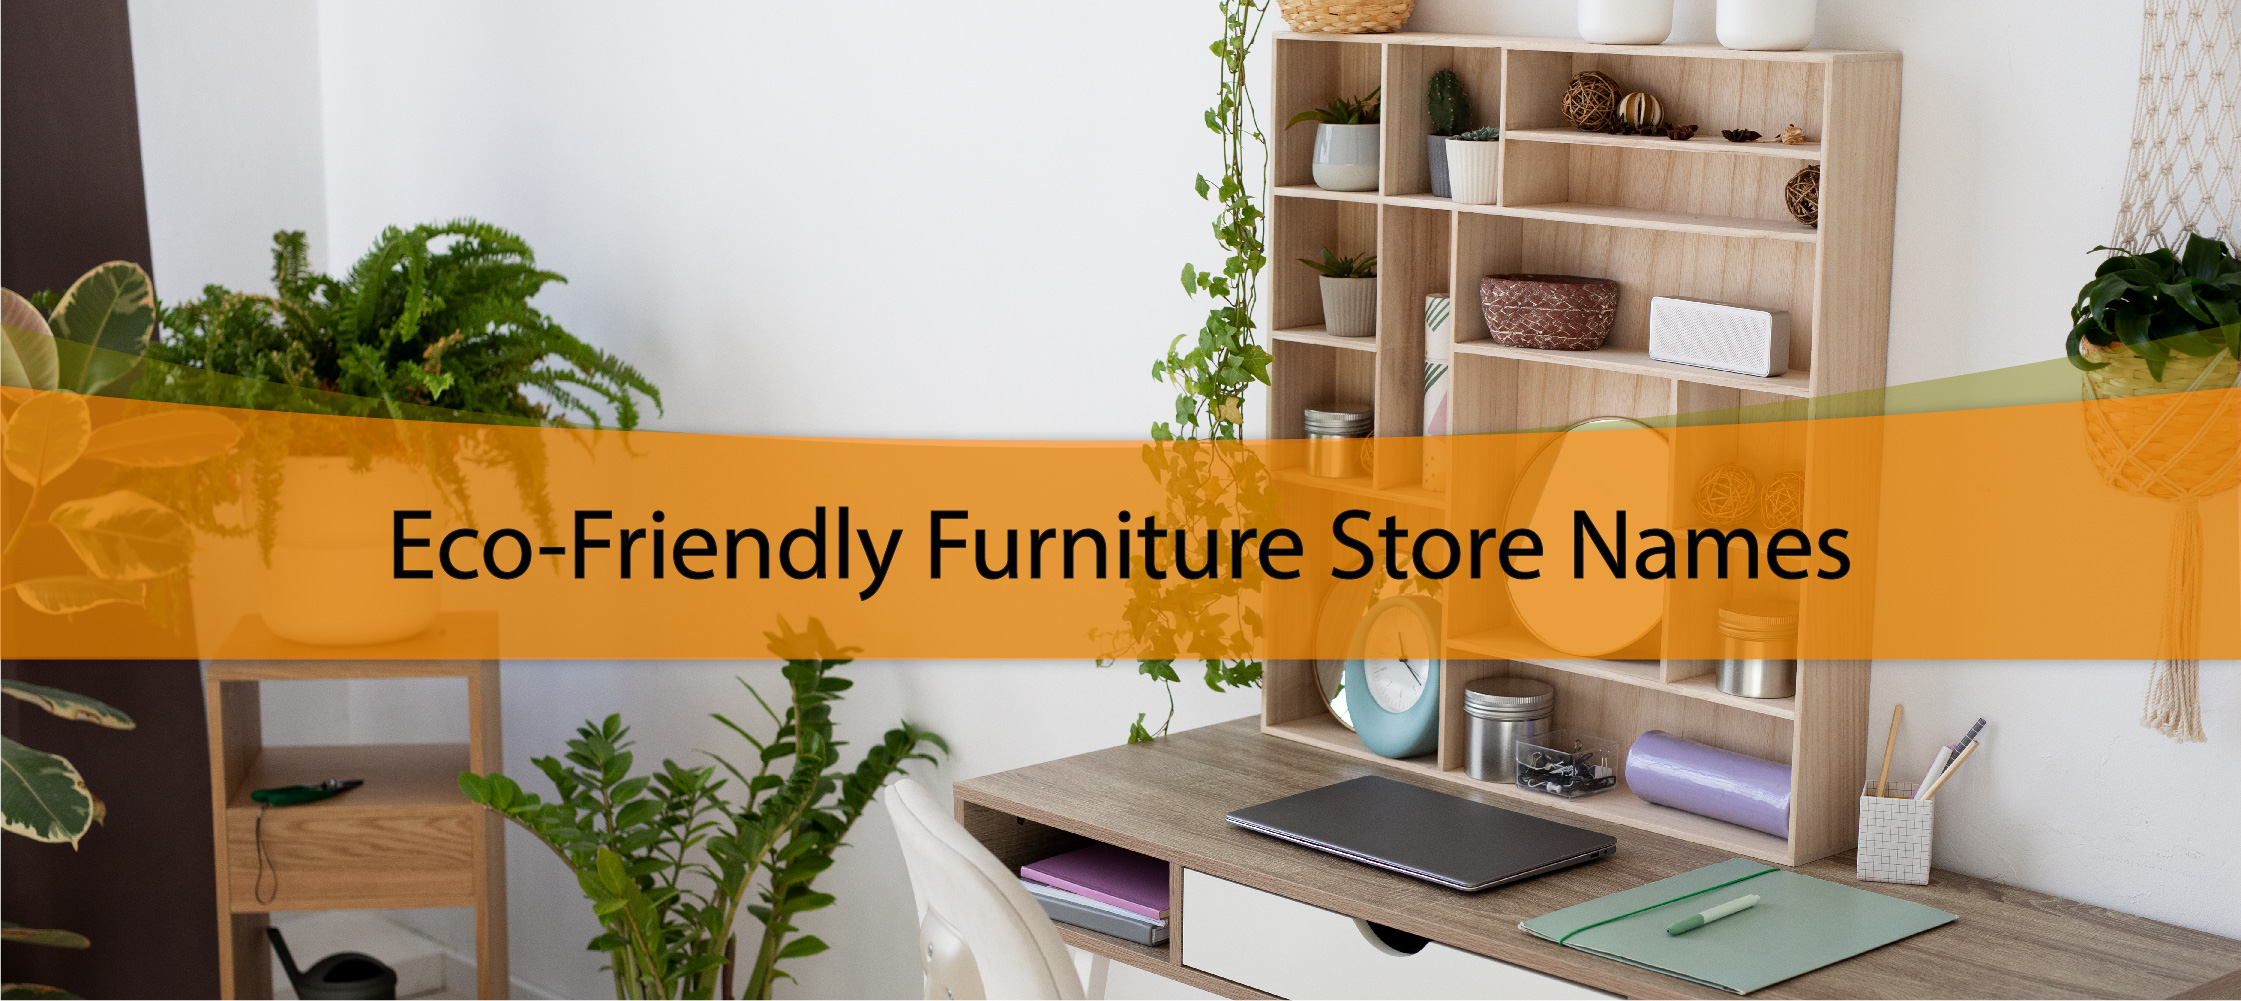 Eco-Friendly Furniture Store Names